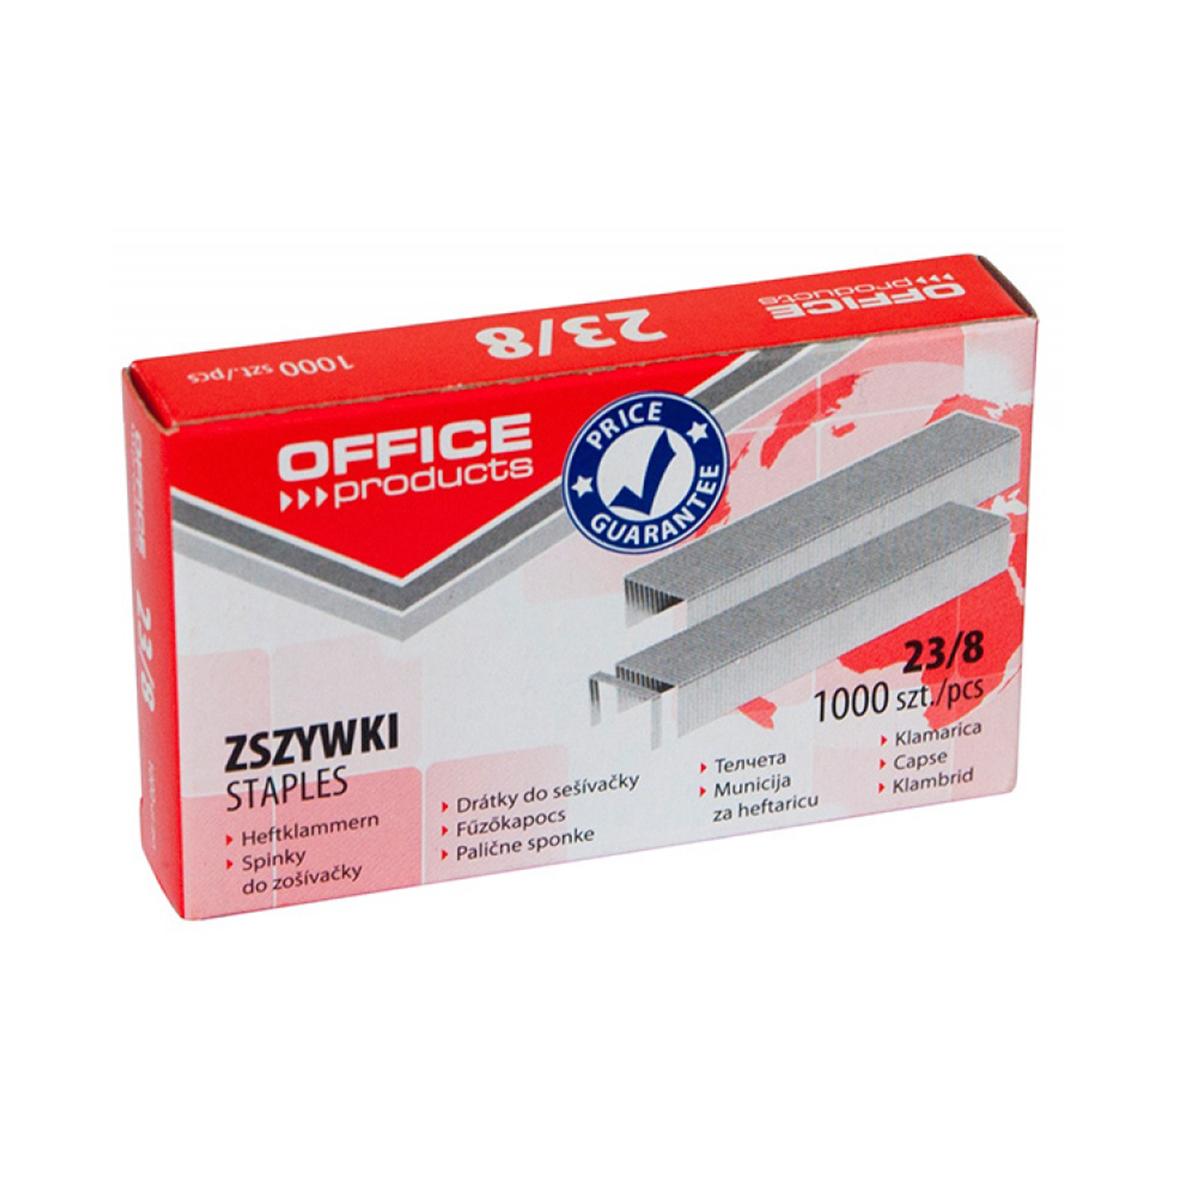 Capse Office Products 23/8, 1000 bucati/set